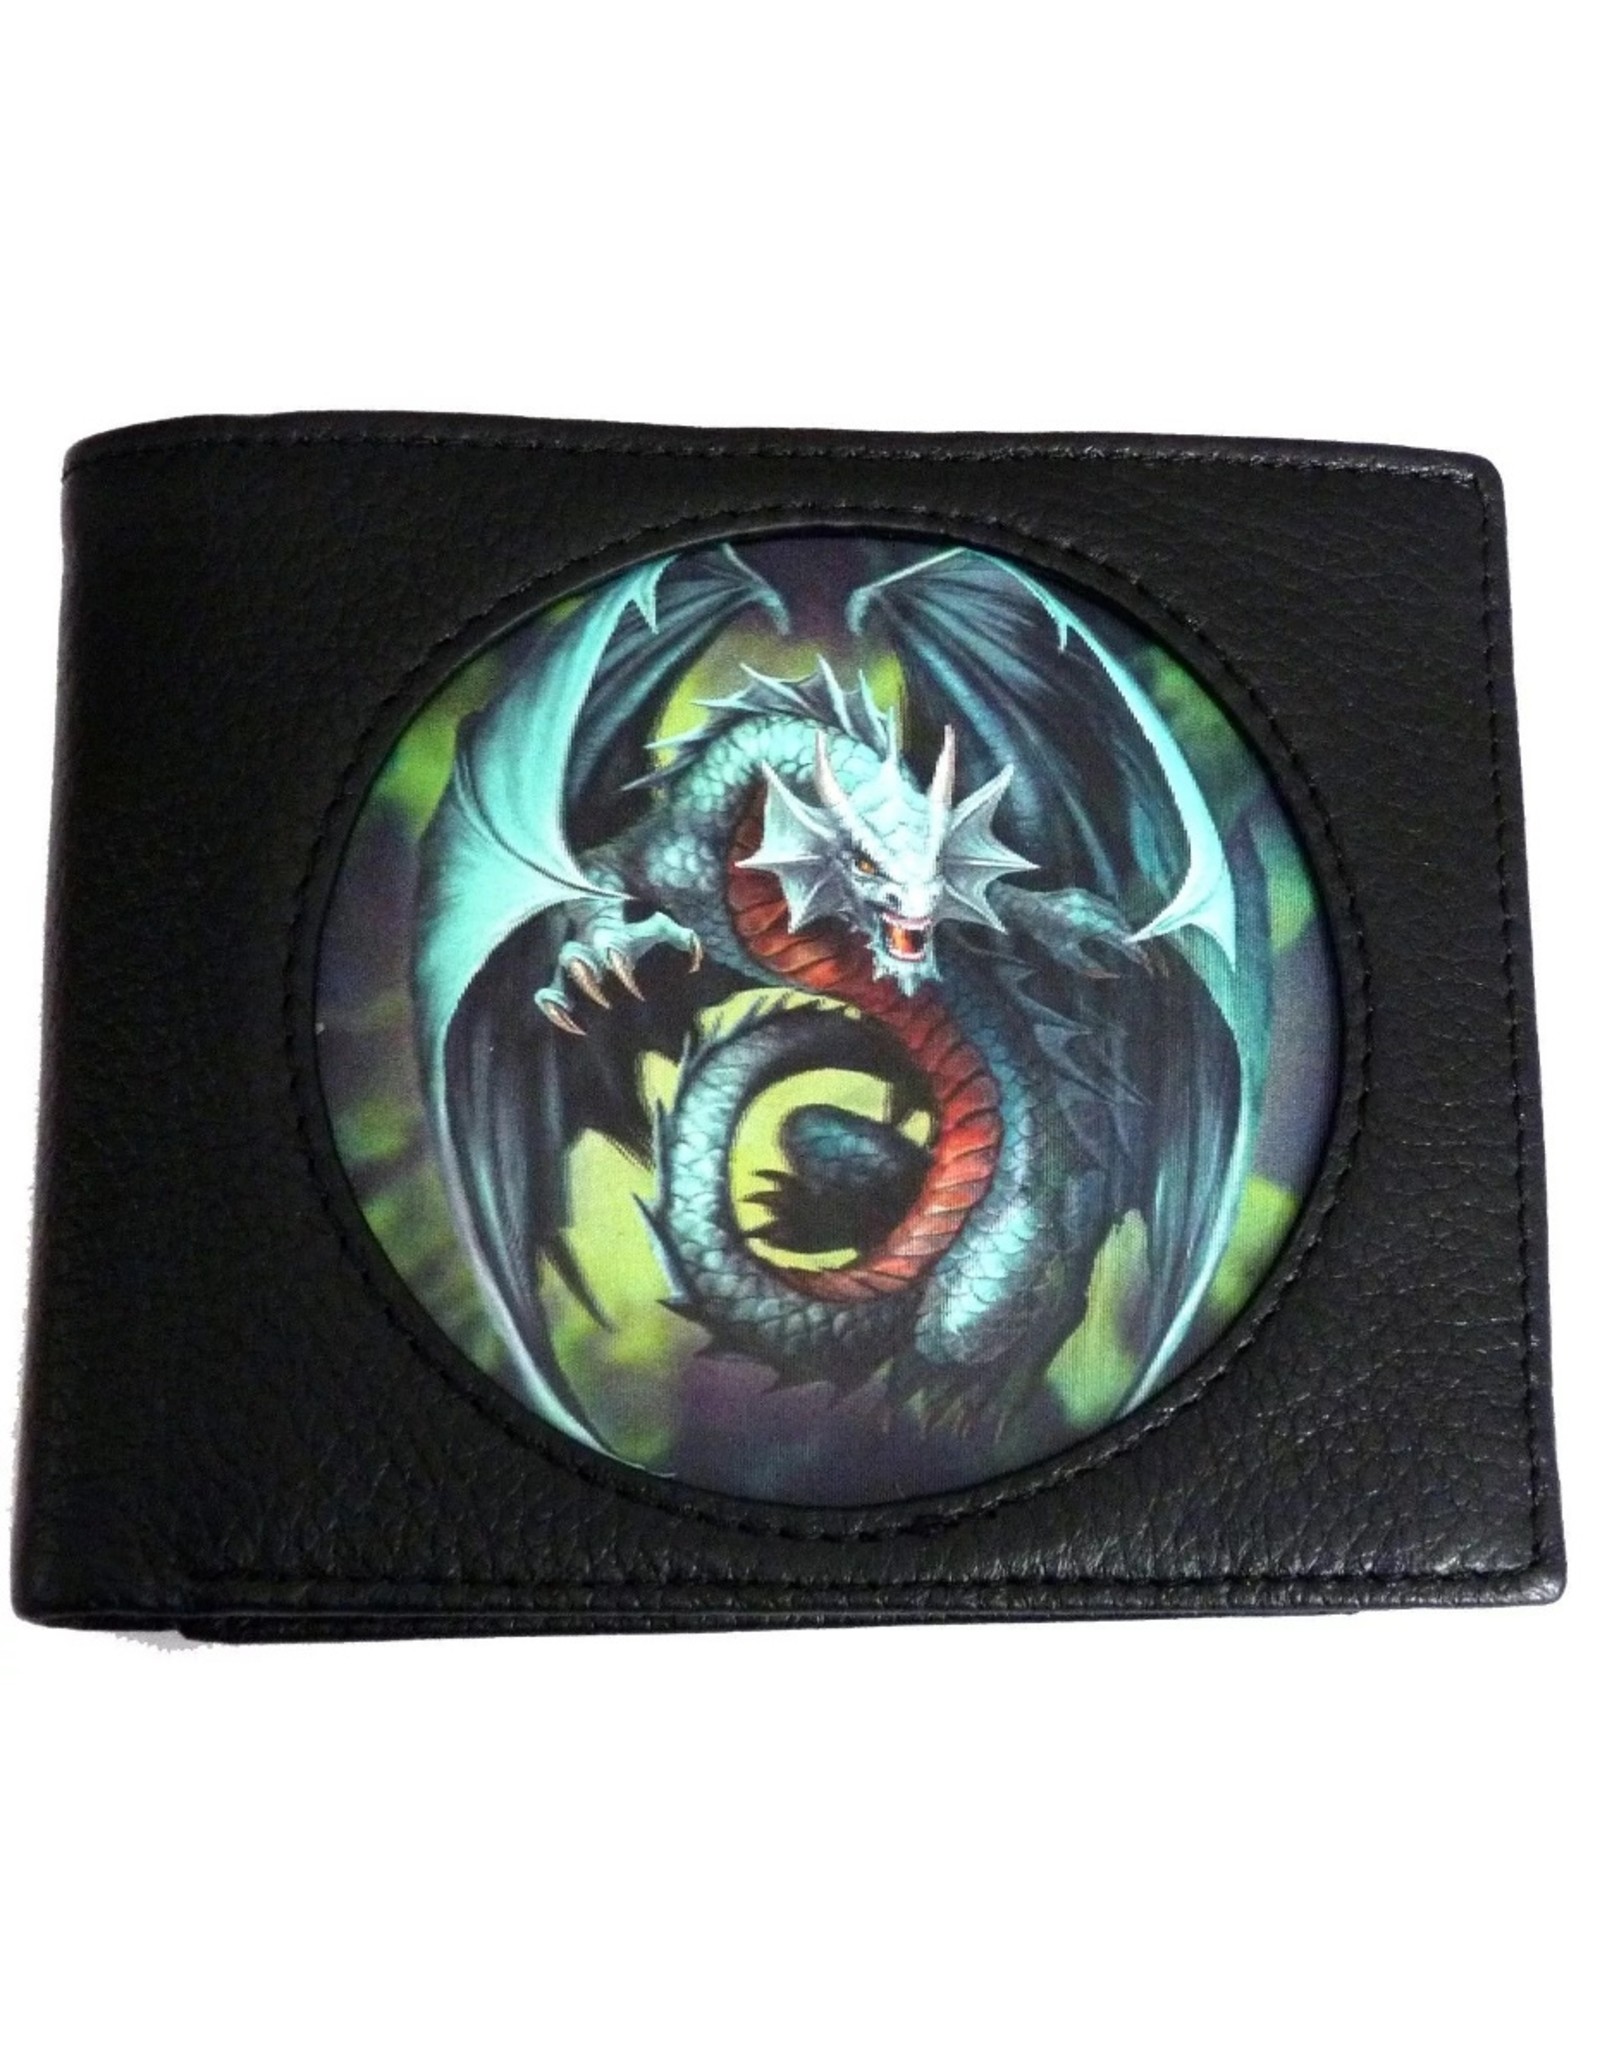 Anne Stokes 3D Wallets and Purses - 3D Wallet with dragon Jade - Anne Stokes Age of Dragons